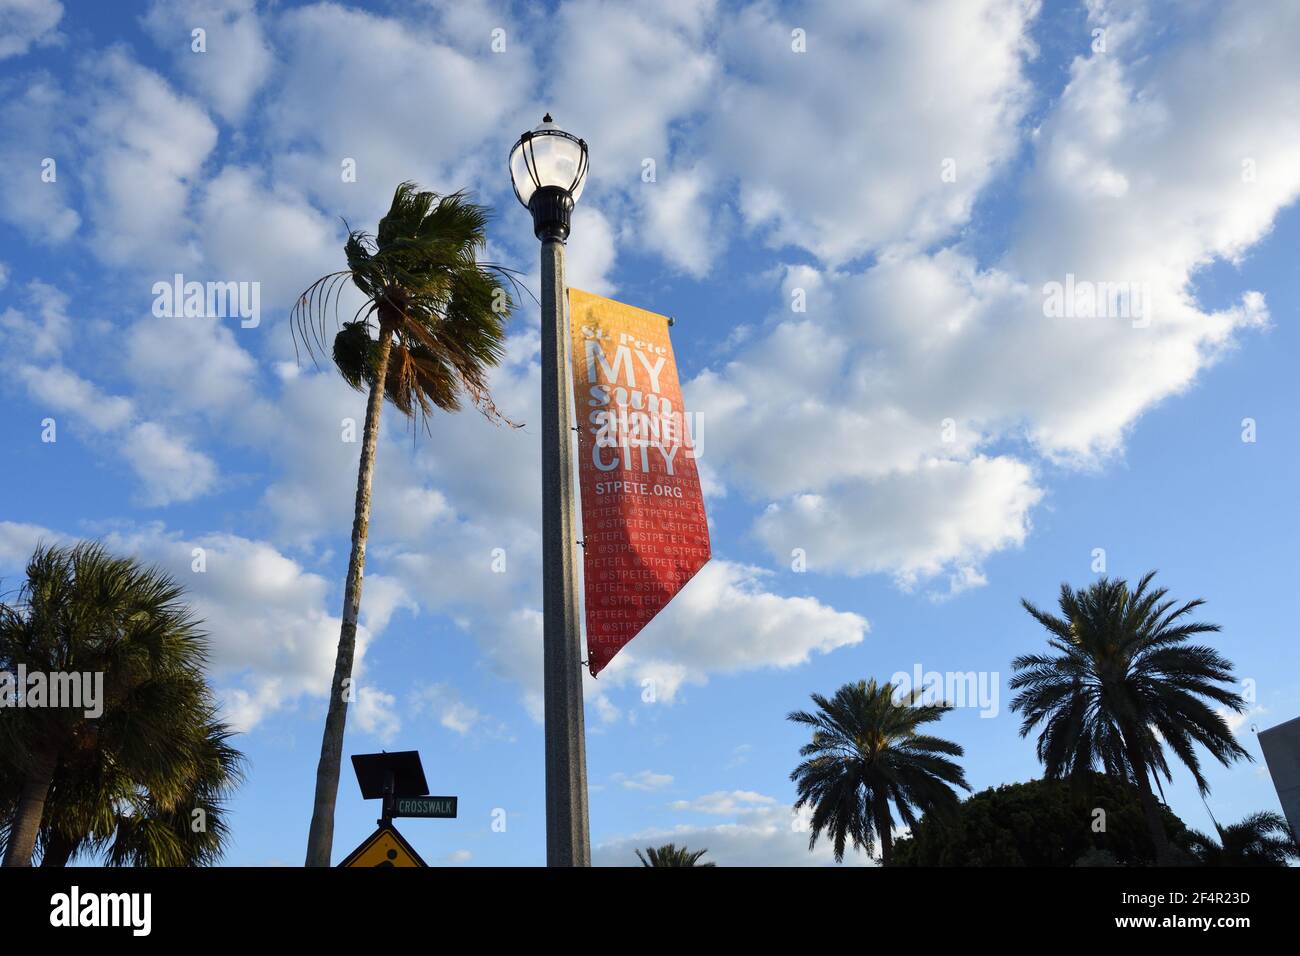 The colorful banner advertising city of St. Petersburg on the street light pole in downtown with Cumulus clouds and blue sky background, Florida,USA. Stock Photo